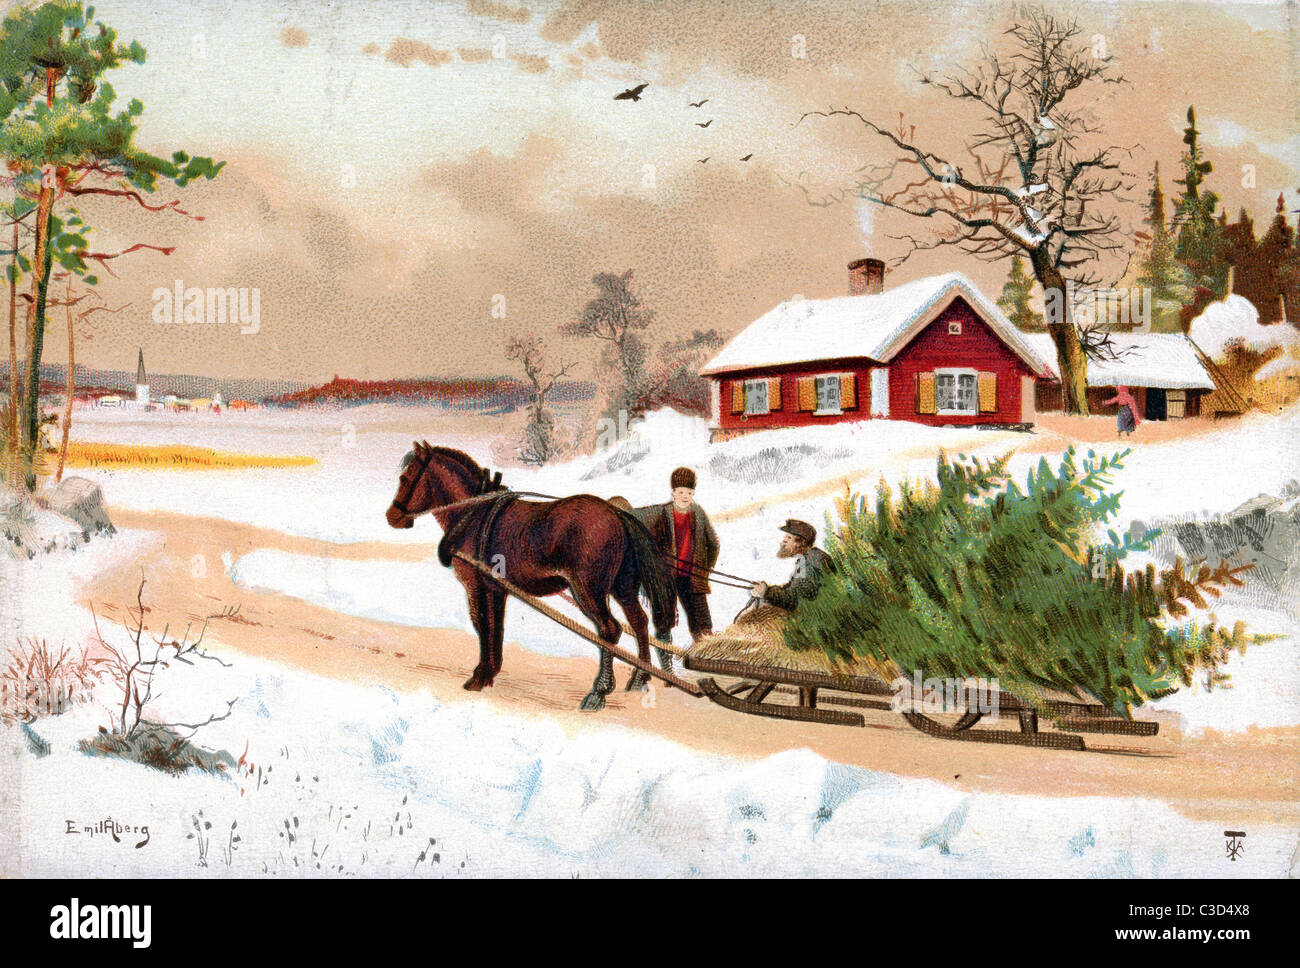 Delivering the Christmas Tree by Horsedrawn Sledge in Sweden Stock Photo